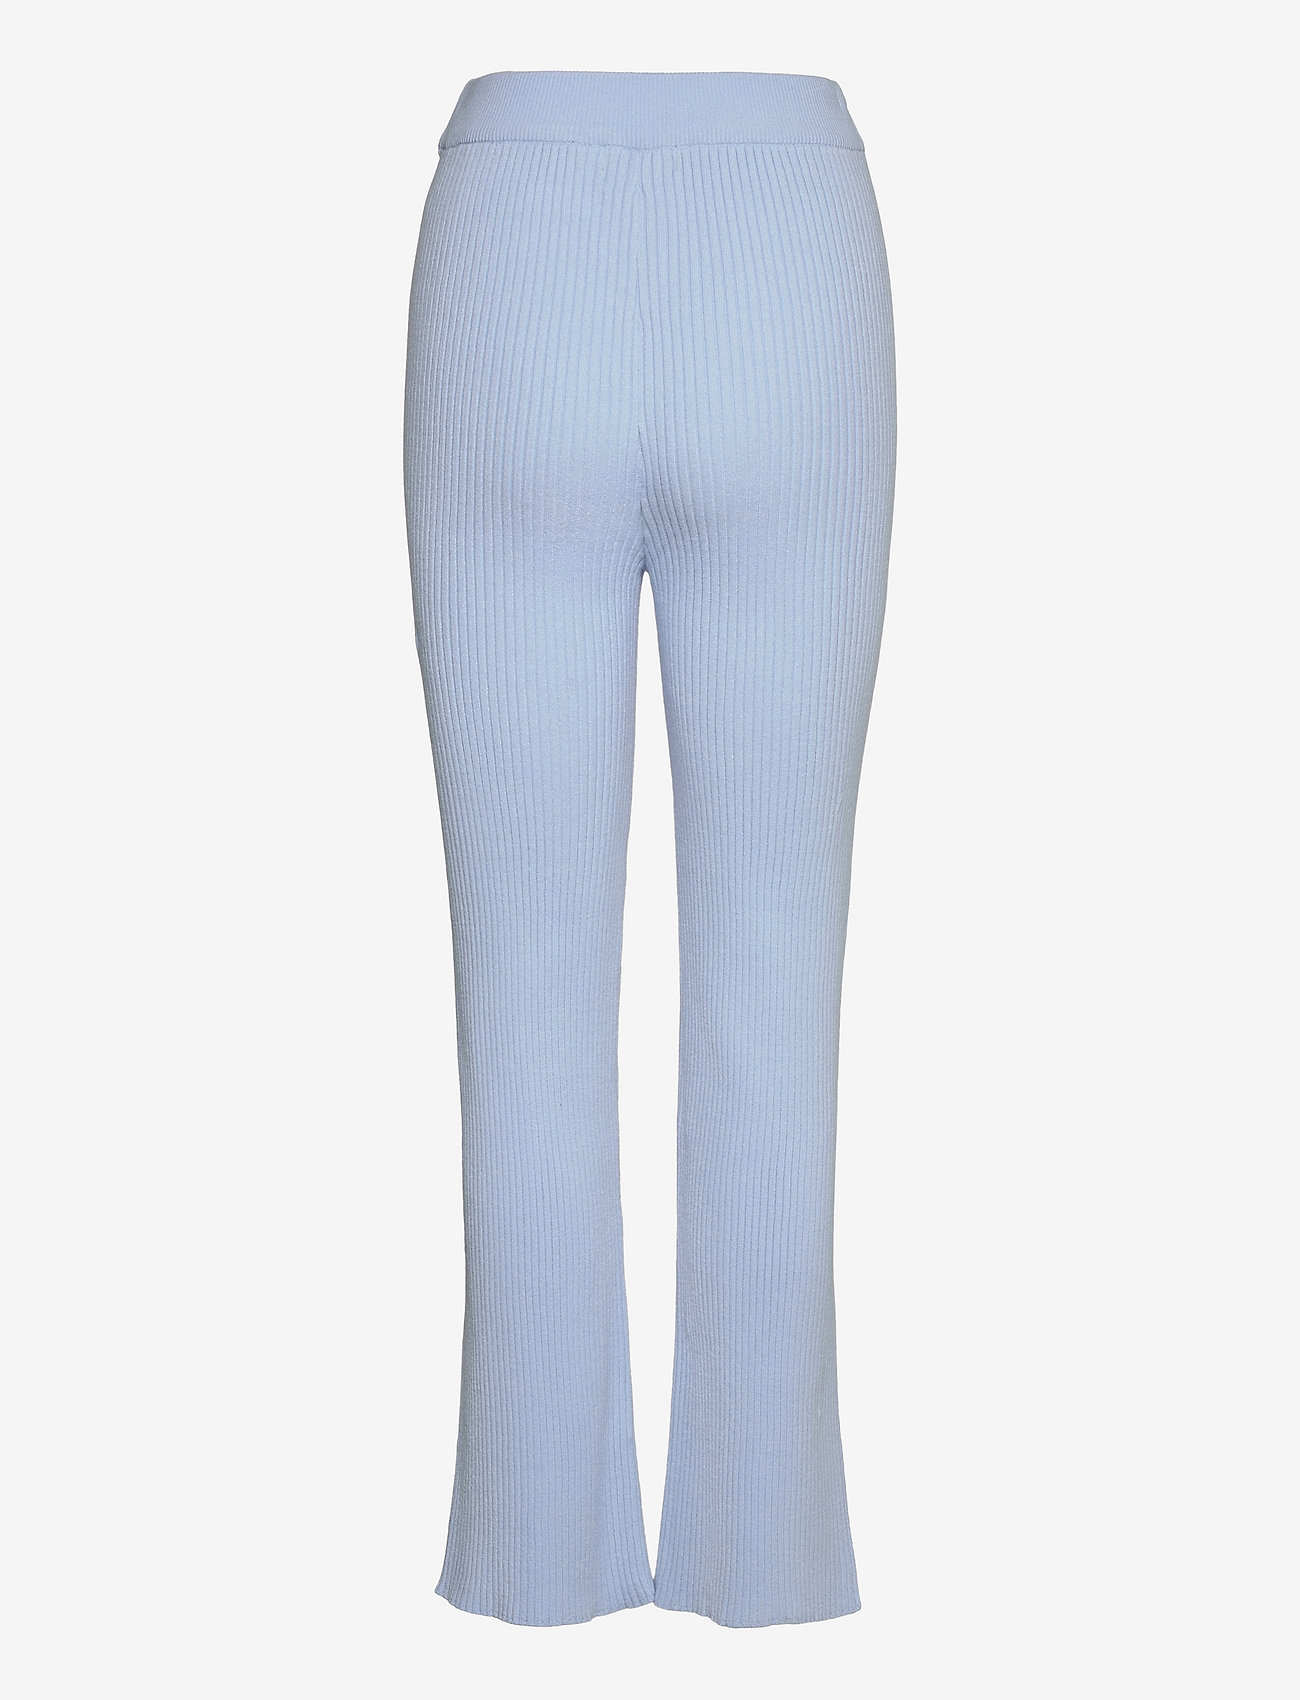 OW Collection - AVERY Pants - women - 026 - blue - 1